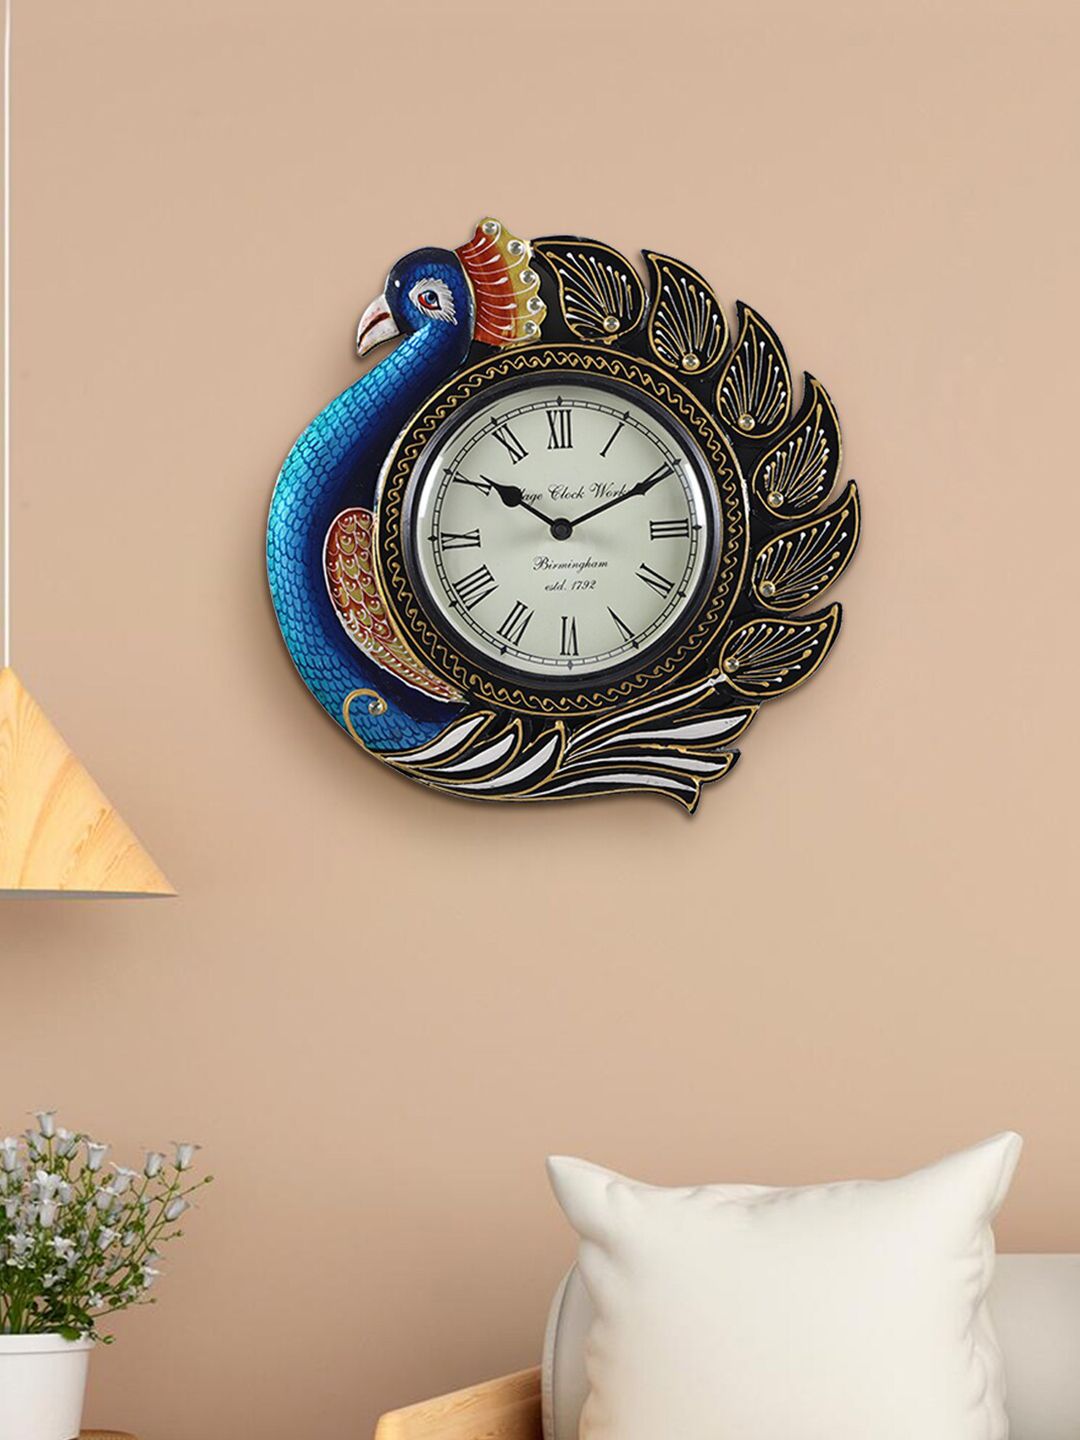 Aapno Rajasthan Blue & Black Embellished Traditional Wall Clock Price in India